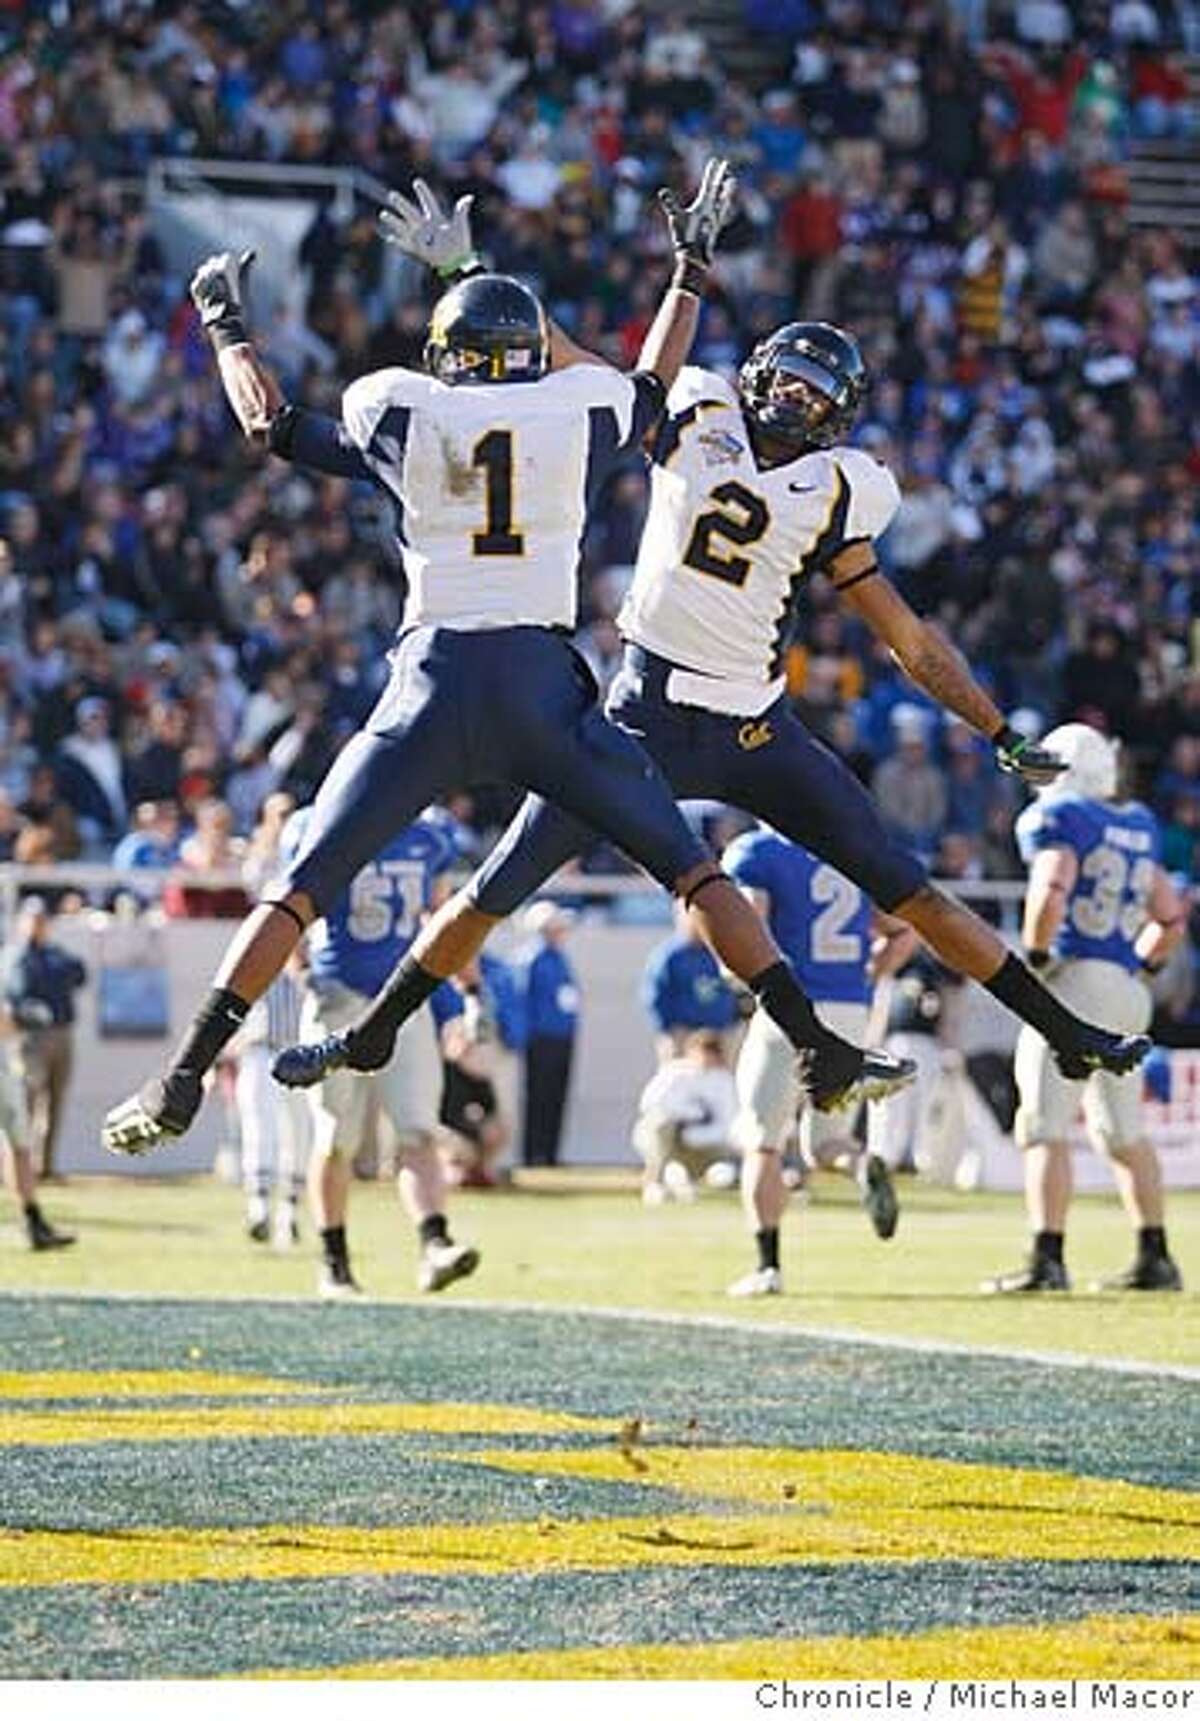 armedforcesbowl_481_mac.jpg California Golden Bear, DeSean Jackson (1) and California Golden Bear, Robert Jordan (2) celebrates Jordan's 18 yards touchdown pass to make it 21-24 Air Force in the 3rd quarter. NCAA Football, the Bell Helicopter Armed Forces bowl, California Golden Bears take on the Air Force Falcons at Amon Carter Stadium, Fort Worth, Texas. Photo by: Michael Macor / The Chronicle Taken on 12/31/07, in Fort Worth, TX, USA